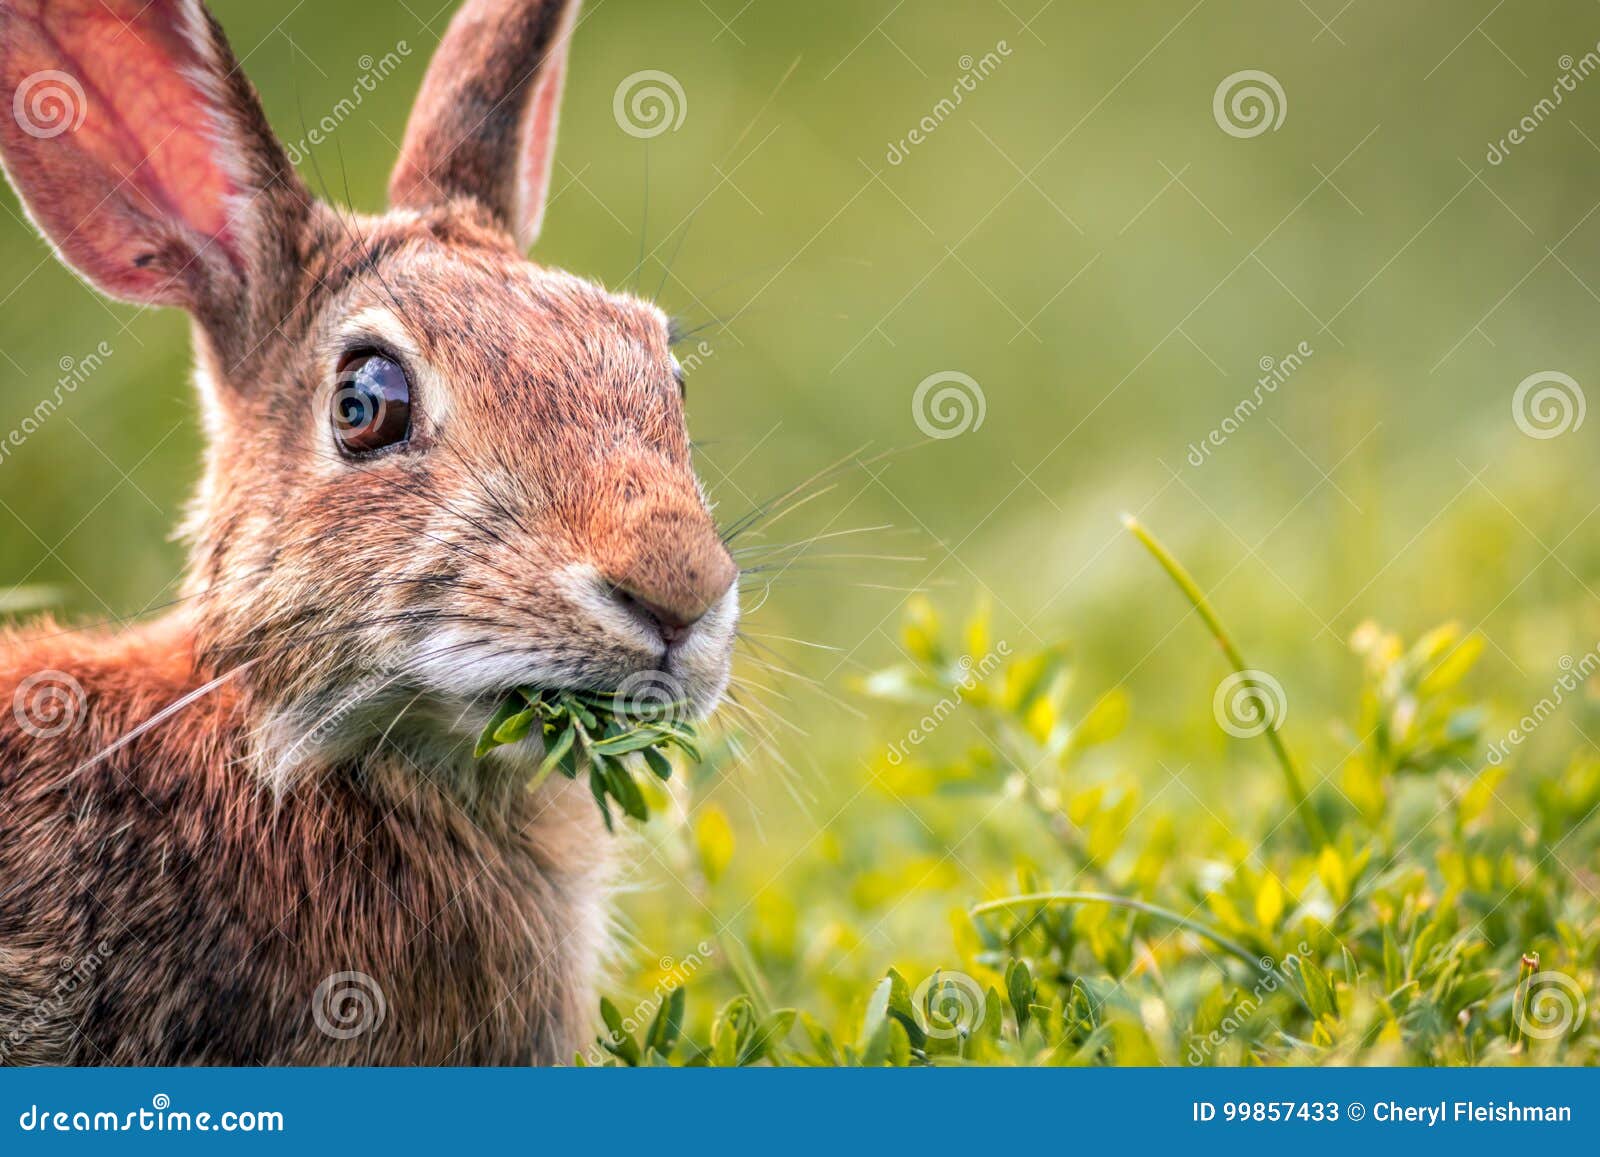 young eastern cottontail rabbit munches on fresh greens